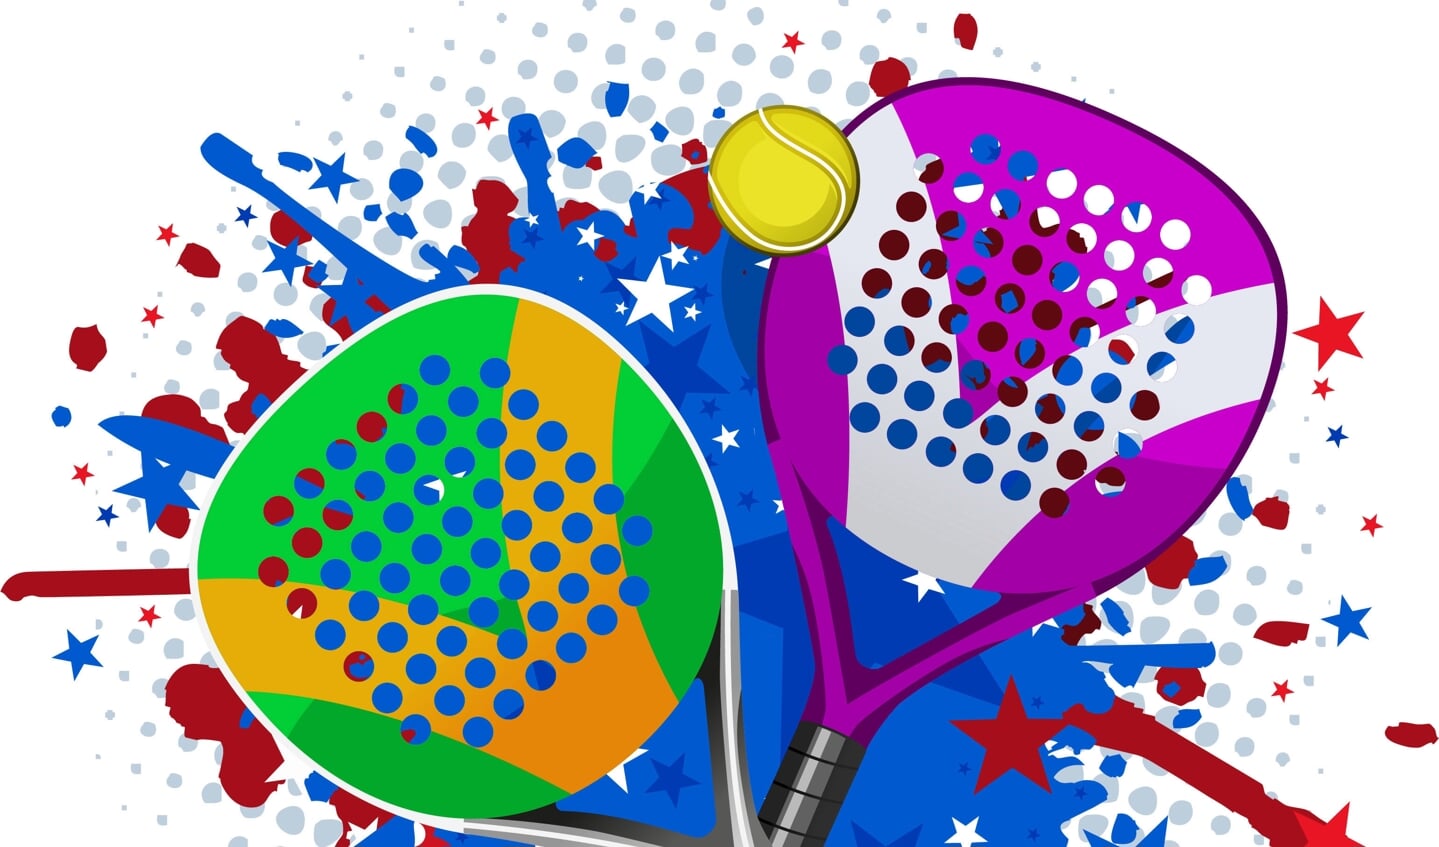 Paddle Match Rackets and Ball Set With red blue splash vector illustration.